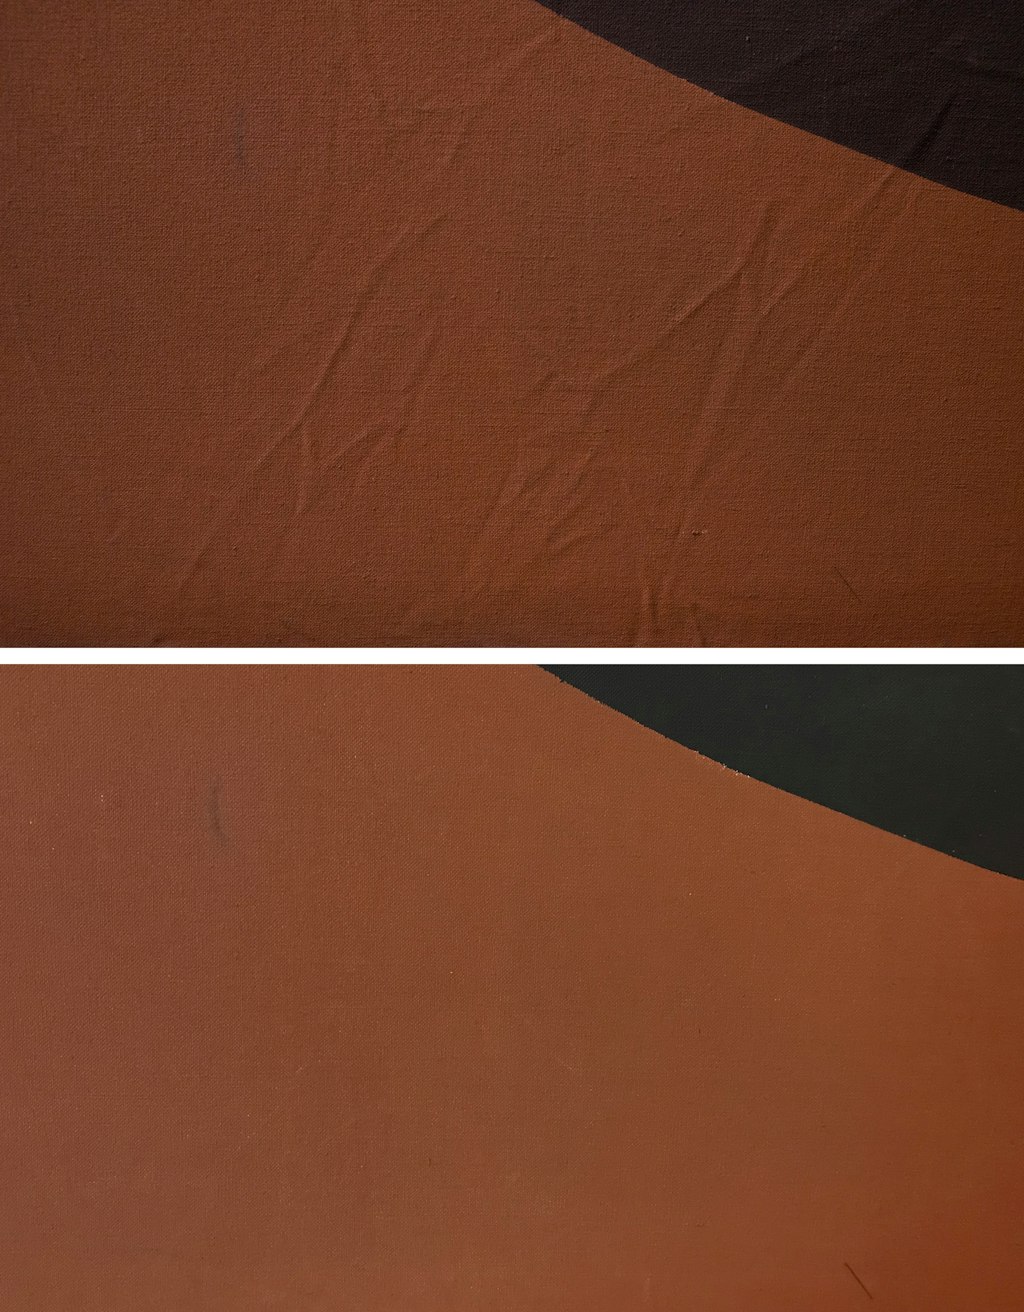 Detail of an area with creases before (top) and after (bottom) treatment